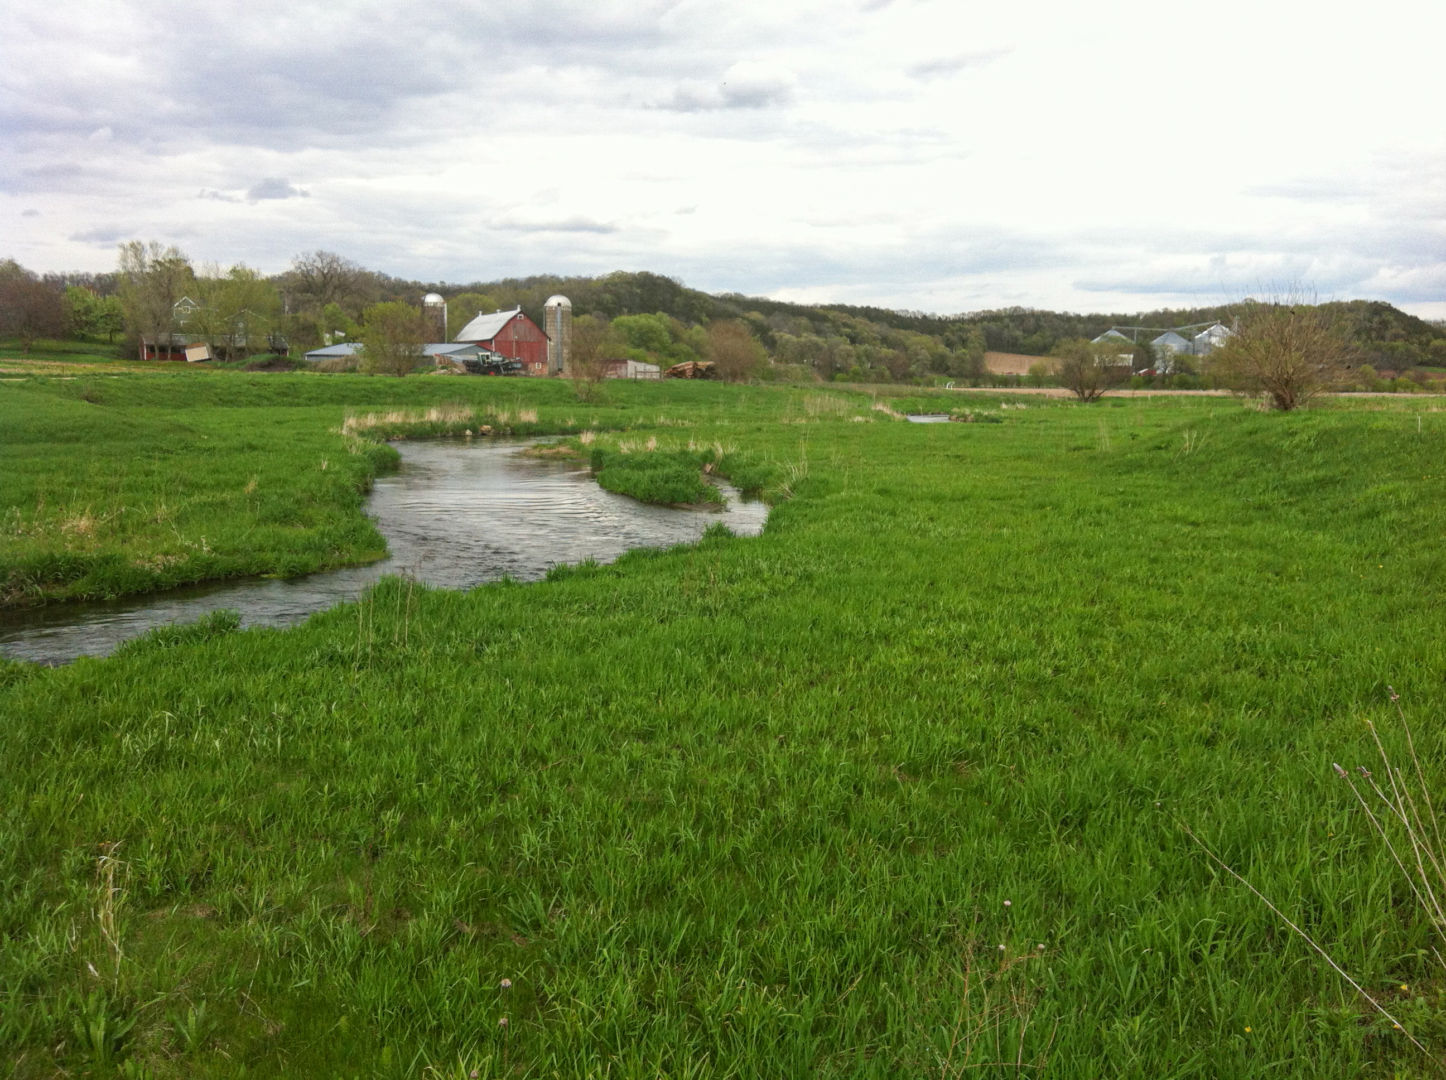 Black Earth Creek with functioning floodplain in foreground with red bard and farm in the background.